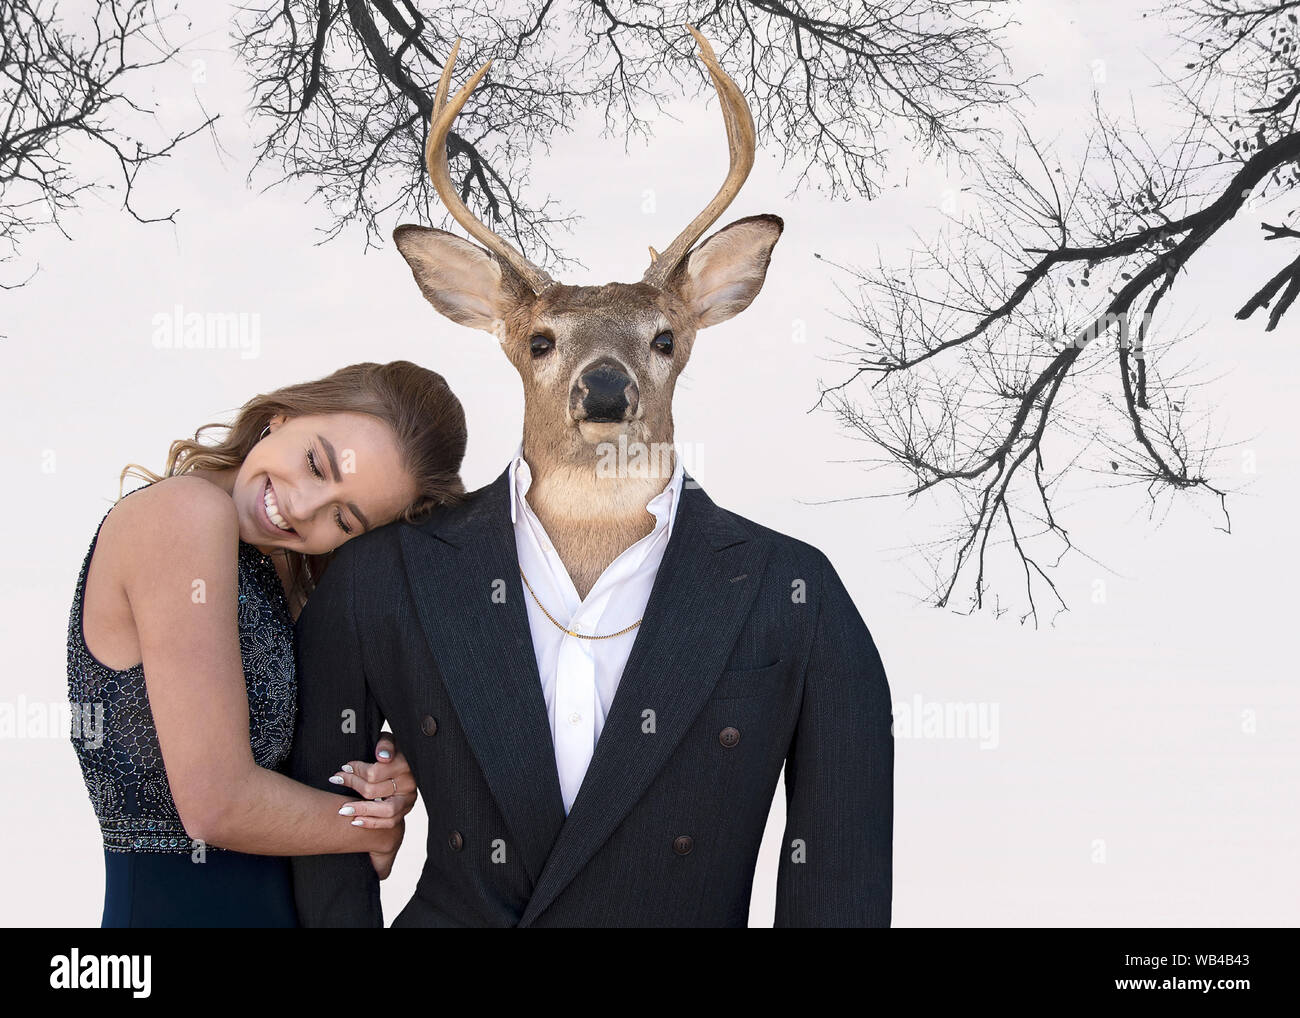 smiling teenage girl and big buck wearing a tuxedo on tree branch background Stock Photo